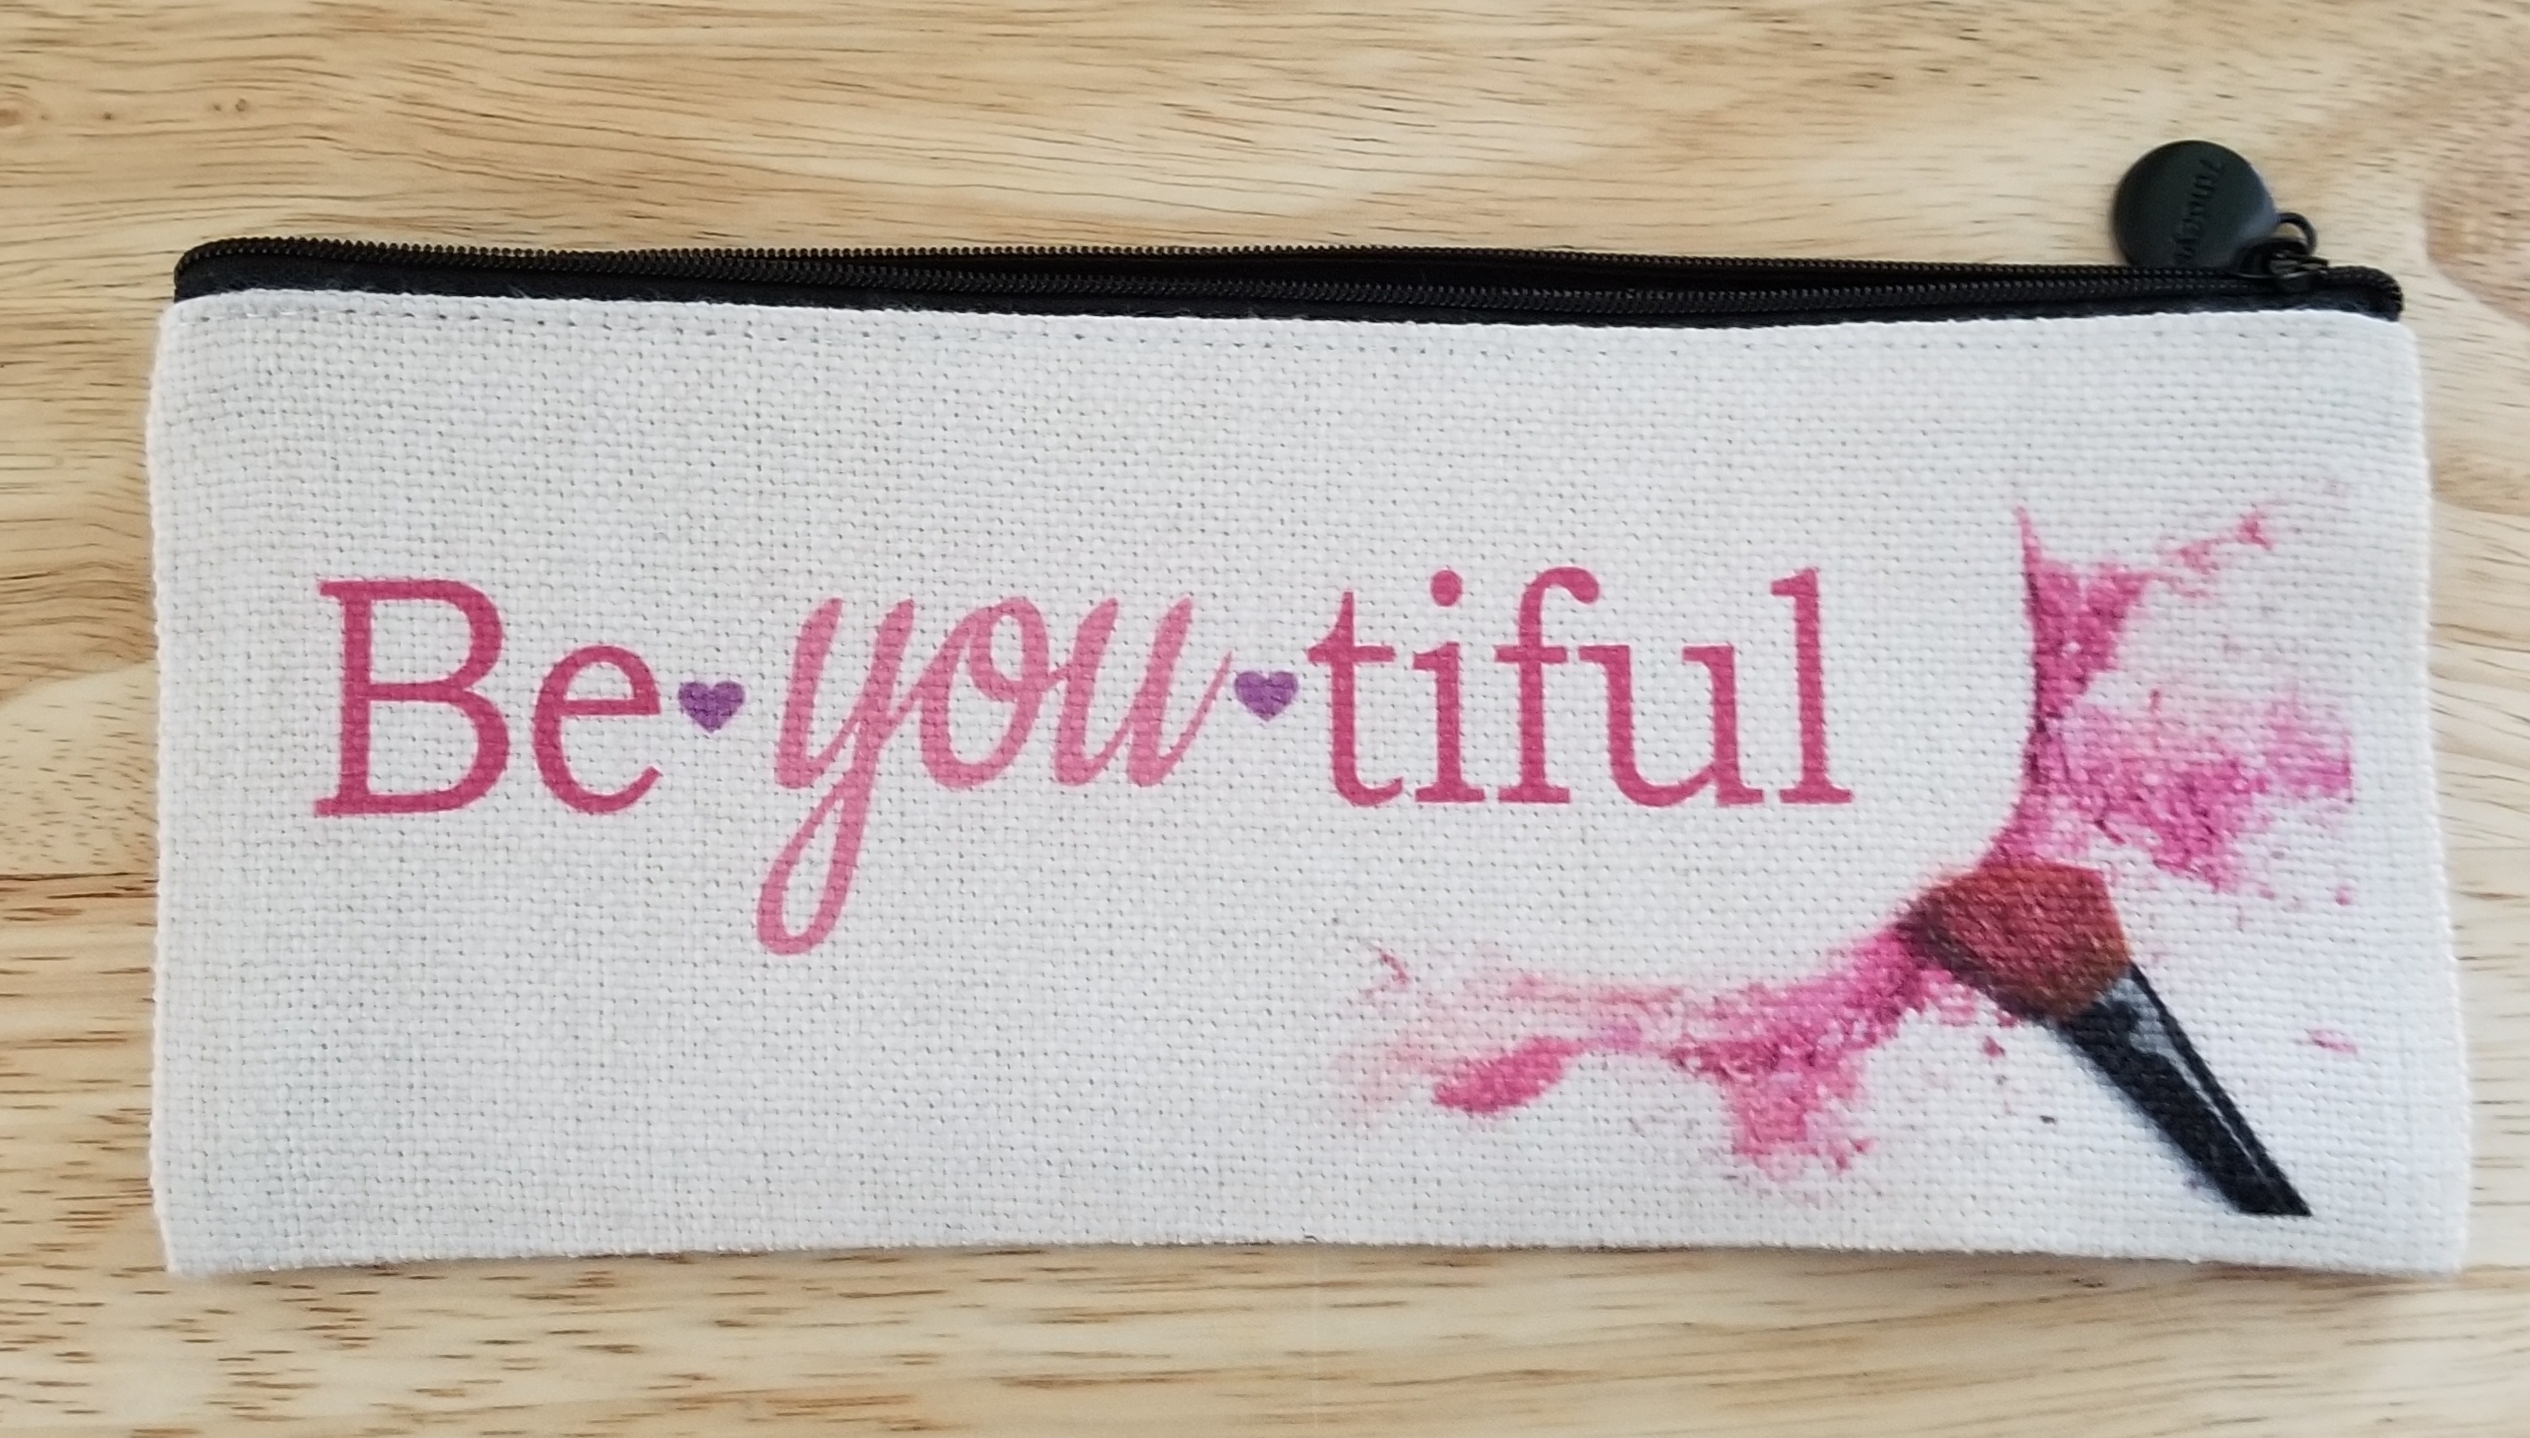 Be YOU tiful brush bag made with sublimation printing